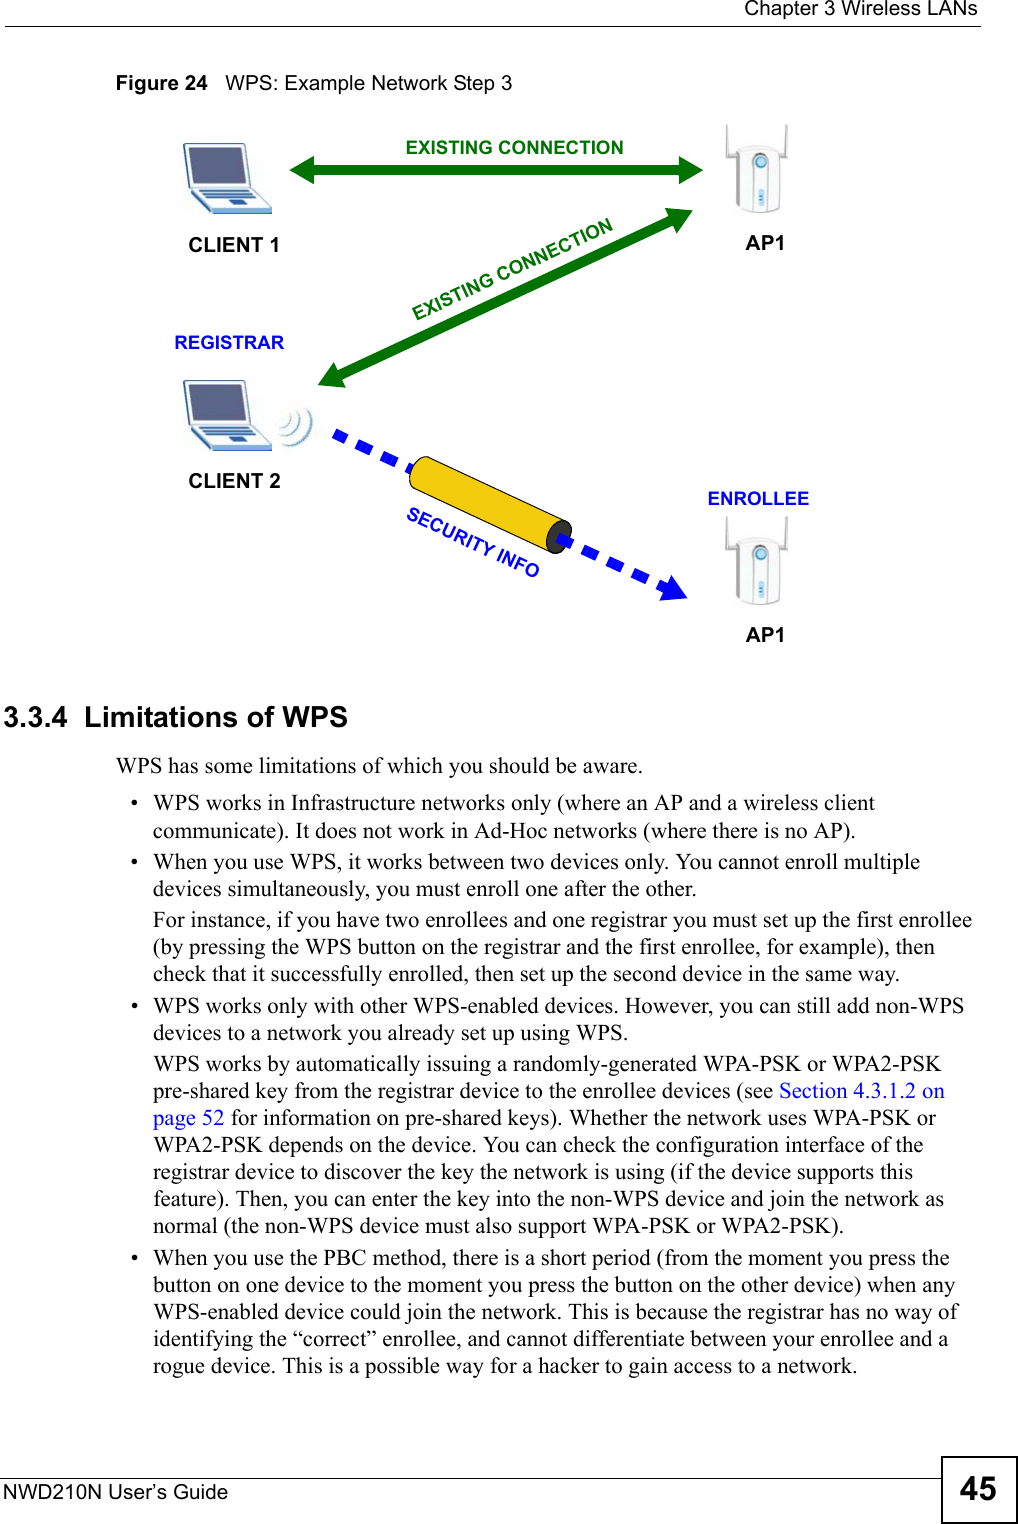  Chapter 3 Wireless LANsNWD210N User’s Guide 45Figure 24   WPS: Example Network Step 33.3.4  Limitations of WPSWPS has some limitations of which you should be aware. • WPS works in Infrastructure networks only (where an AP and a wireless client communicate). It does not work in Ad-Hoc networks (where there is no AP).• When you use WPS, it works between two devices only. You cannot enroll multiple devices simultaneously, you must enroll one after the other. For instance, if you have two enrollees and one registrar you must set up the first enrollee (by pressing the WPS button on the registrar and the first enrollee, for example), then check that it successfully enrolled, then set up the second device in the same way.• WPS works only with other WPS-enabled devices. However, you can still add non-WPS devices to a network you already set up using WPS. WPS works by automatically issuing a randomly-generated WPA-PSK or WPA2-PSK pre-shared key from the registrar device to the enrollee devices (see Section 4.3.1.2 on page 52 for information on pre-shared keys). Whether the network uses WPA-PSK or WPA2-PSK depends on the device. You can check the configuration interface of the registrar device to discover the key the network is using (if the device supports this feature). Then, you can enter the key into the non-WPS device and join the network as normal (the non-WPS device must also support WPA-PSK or WPA2-PSK).• When you use the PBC method, there is a short period (from the moment you press the button on one device to the moment you press the button on the other device) when any WPS-enabled device could join the network. This is because the registrar has no way of identifying the “correct” enrollee, and cannot differentiate between your enrollee and a rogue device. This is a possible way for a hacker to gain access to a network.CLIENT 1 AP1REGISTRARCLIENT 2EXISTING CONNECTIONSECURITY INFOENROLLEEAP1EXISTING CONNECTION